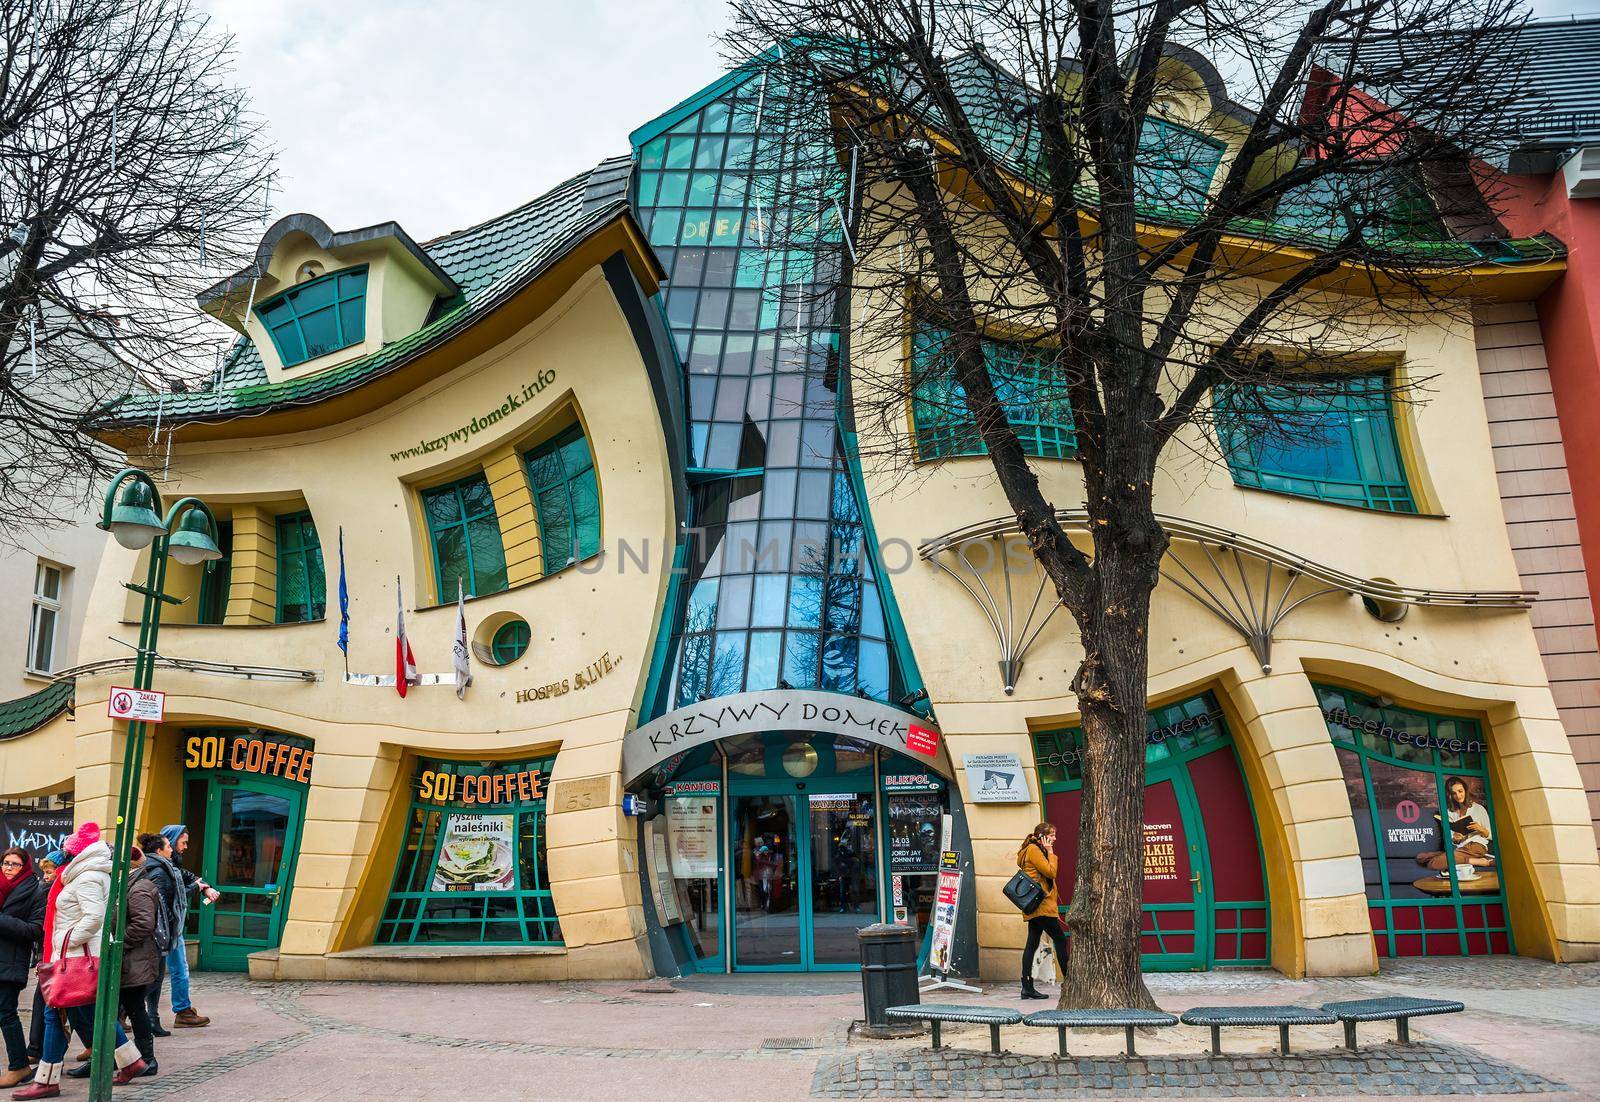 The Crooked House on the Sopot by tan4ikk1